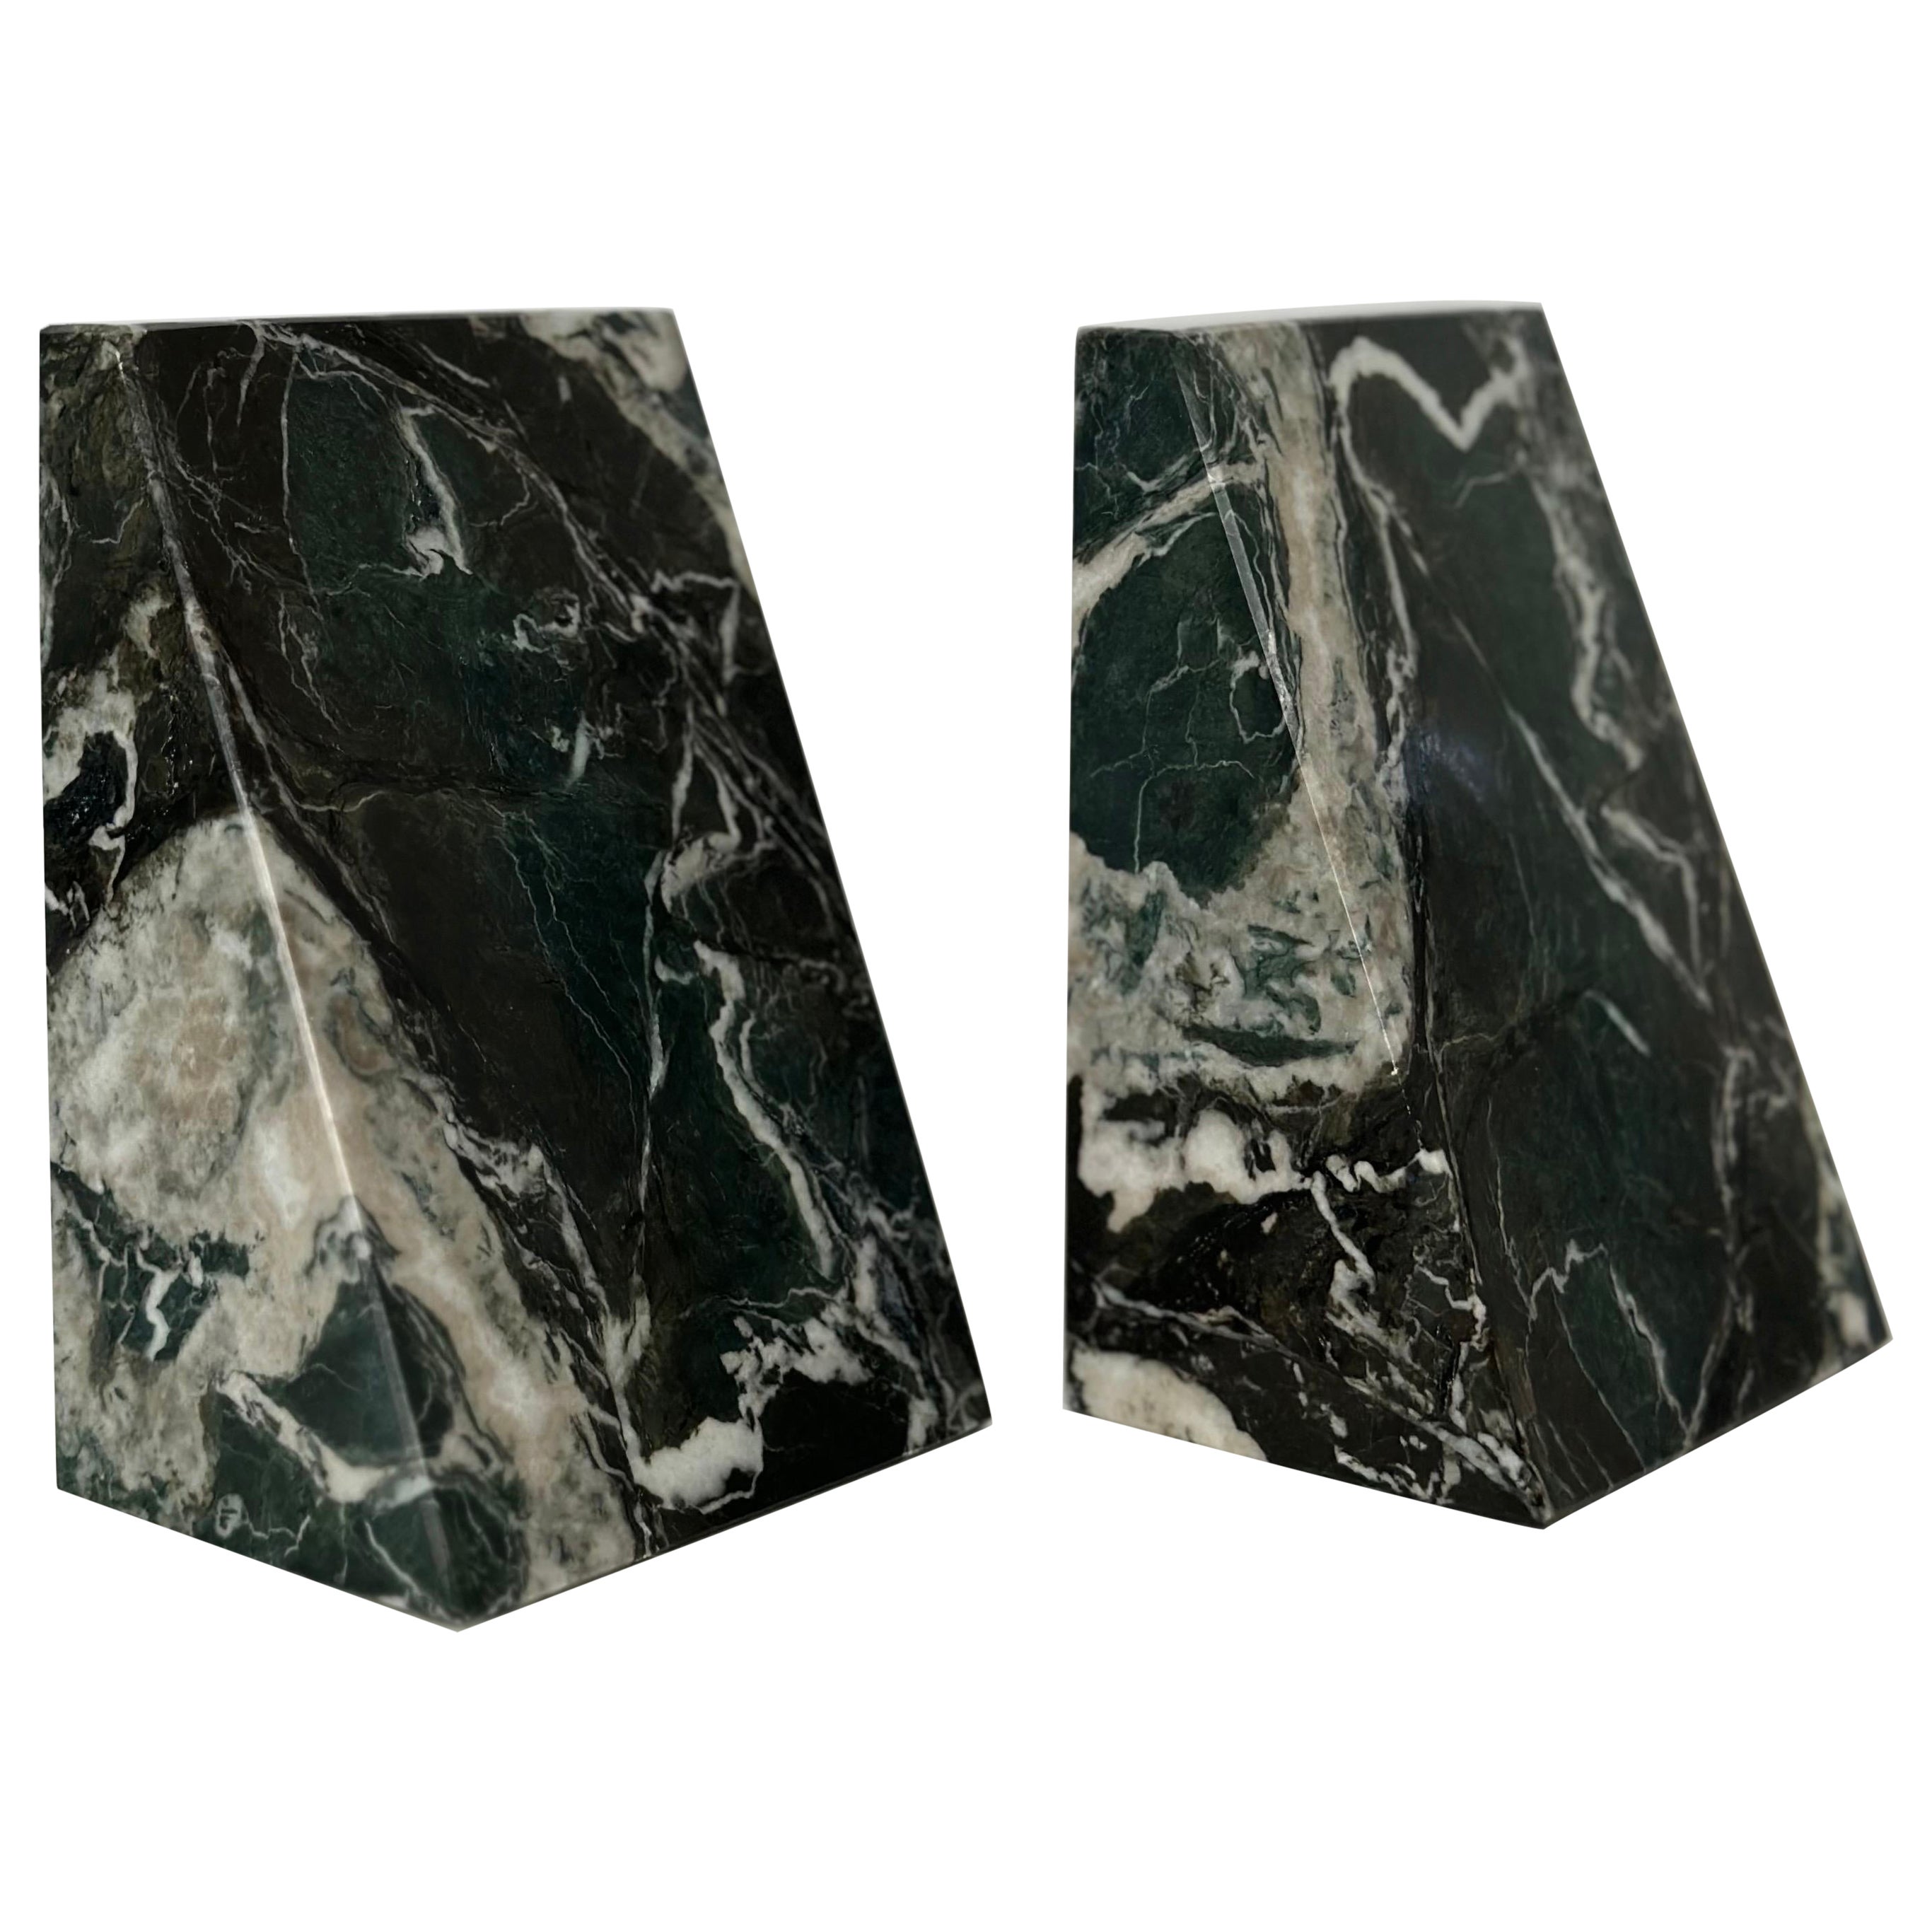 1970s Vintage Triangular Green and Black Marble Bookends - a Pair For Sale